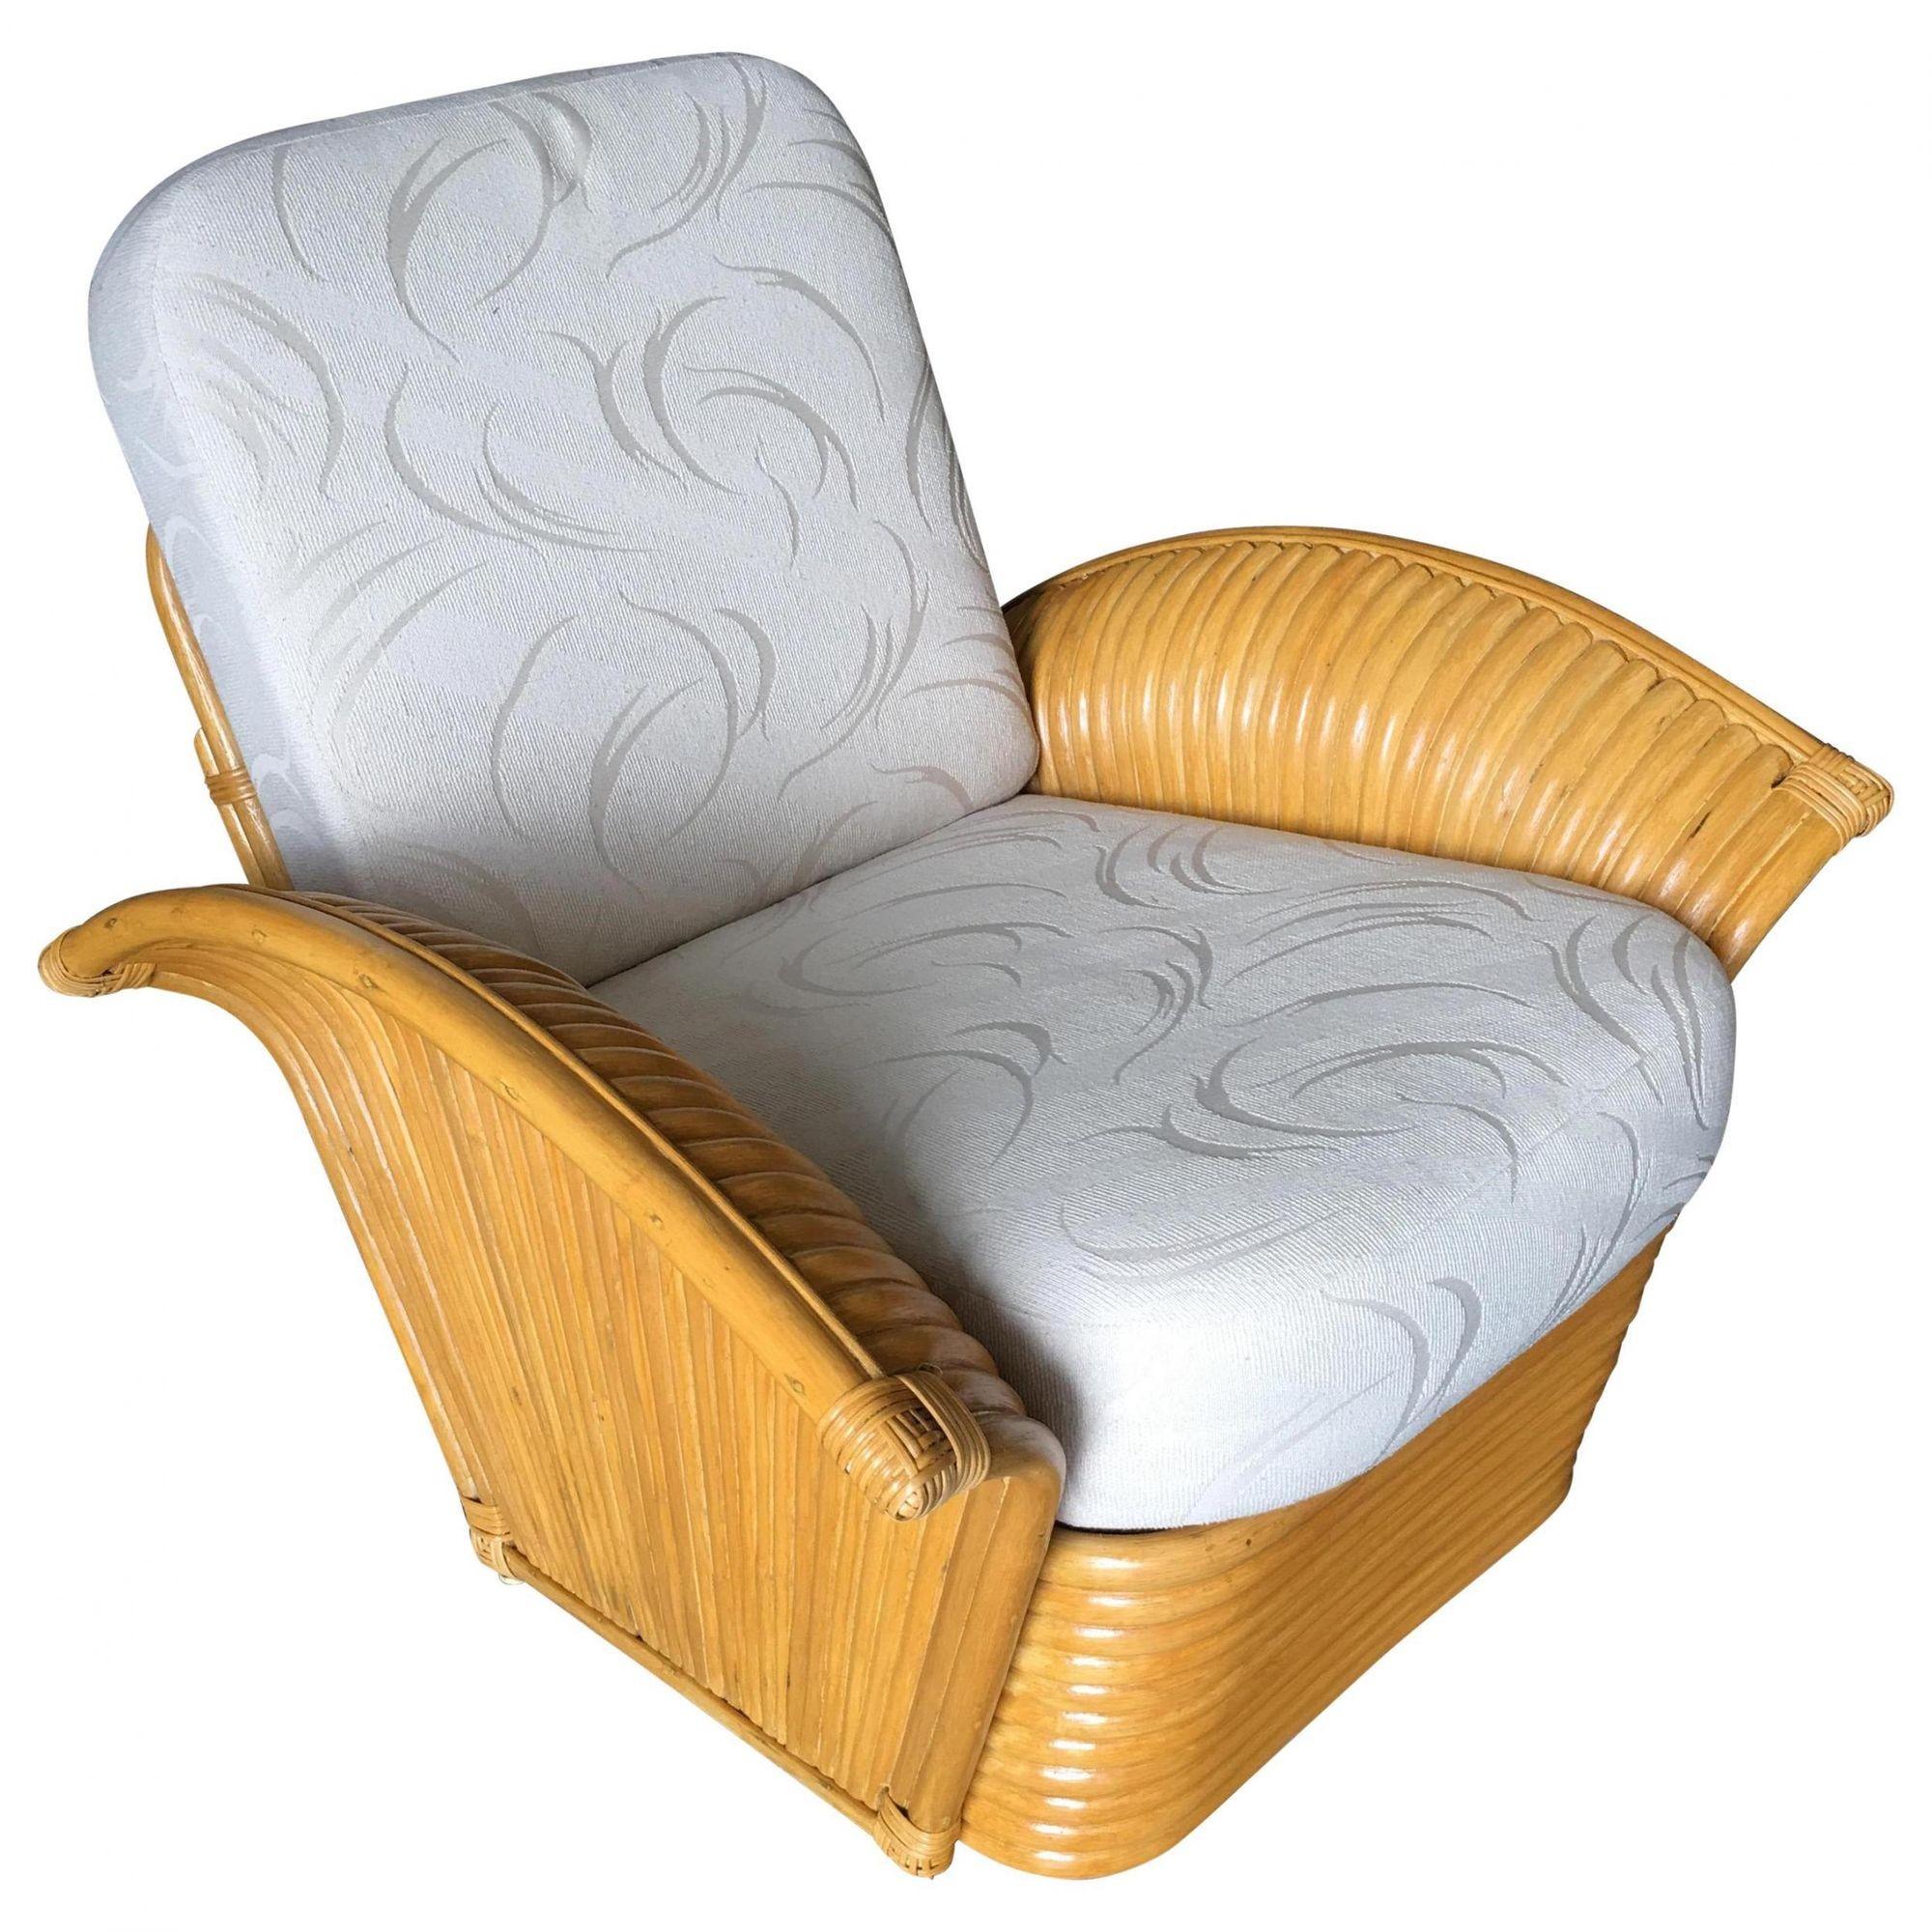 Original rattan fan arm lounge chair with the white seat covering.

Custom cushions C.O.M. (Costumer's Own Material) are included in the price.

Simply supply the fabric and we have the cushions made for you. If you need help sourcing fabric we